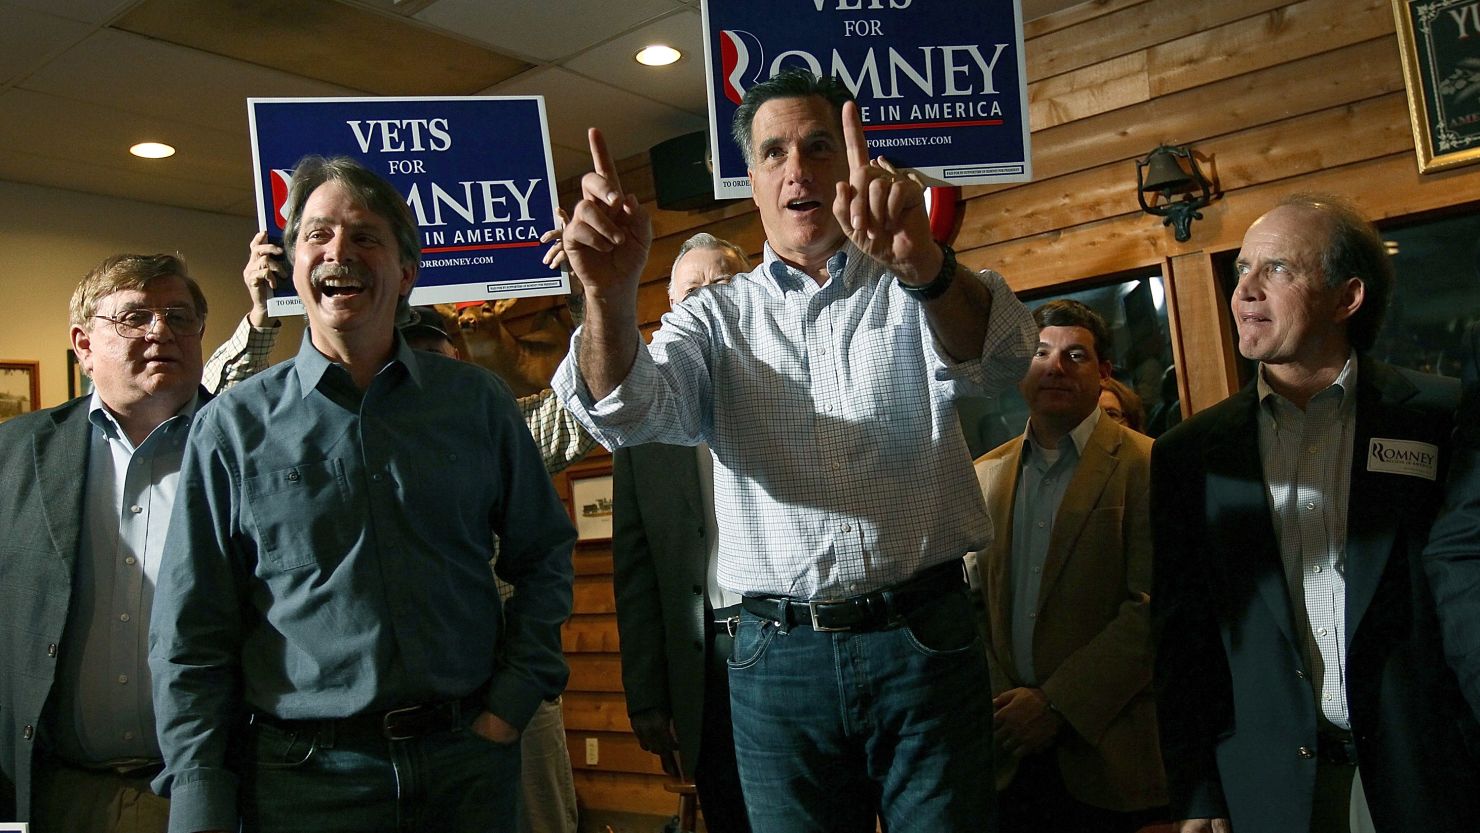 Mitt Romney makes a campaign appearance with comedian Jeff Foxworthy at the Whistle Stop cafe in Mobile, Alabama. 